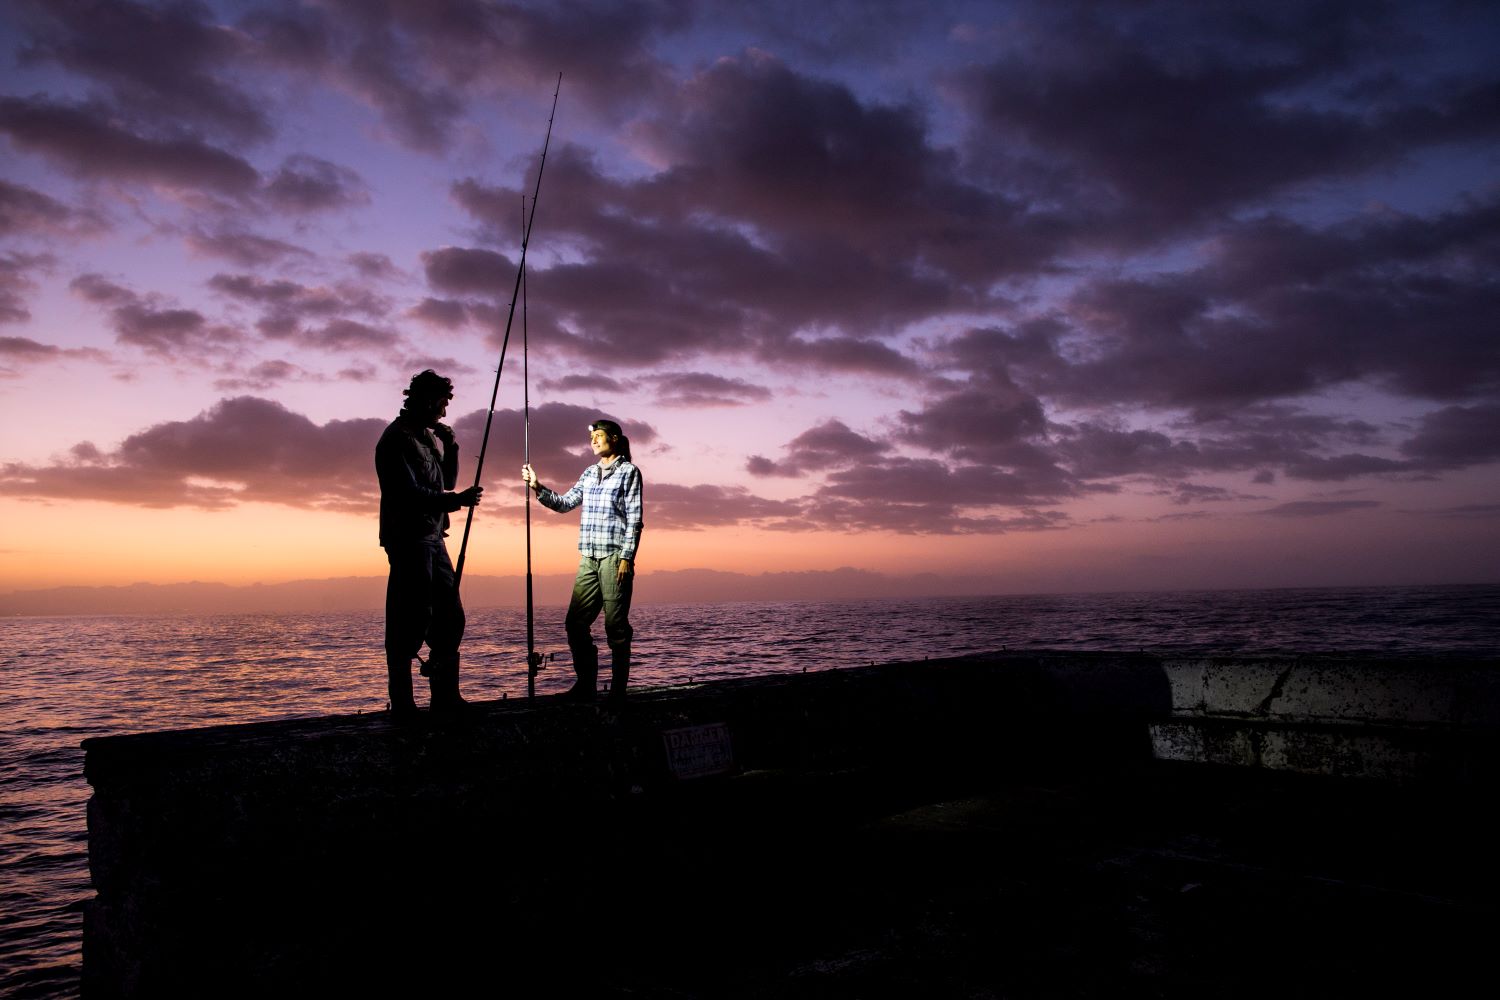 Two fishers with headlamps